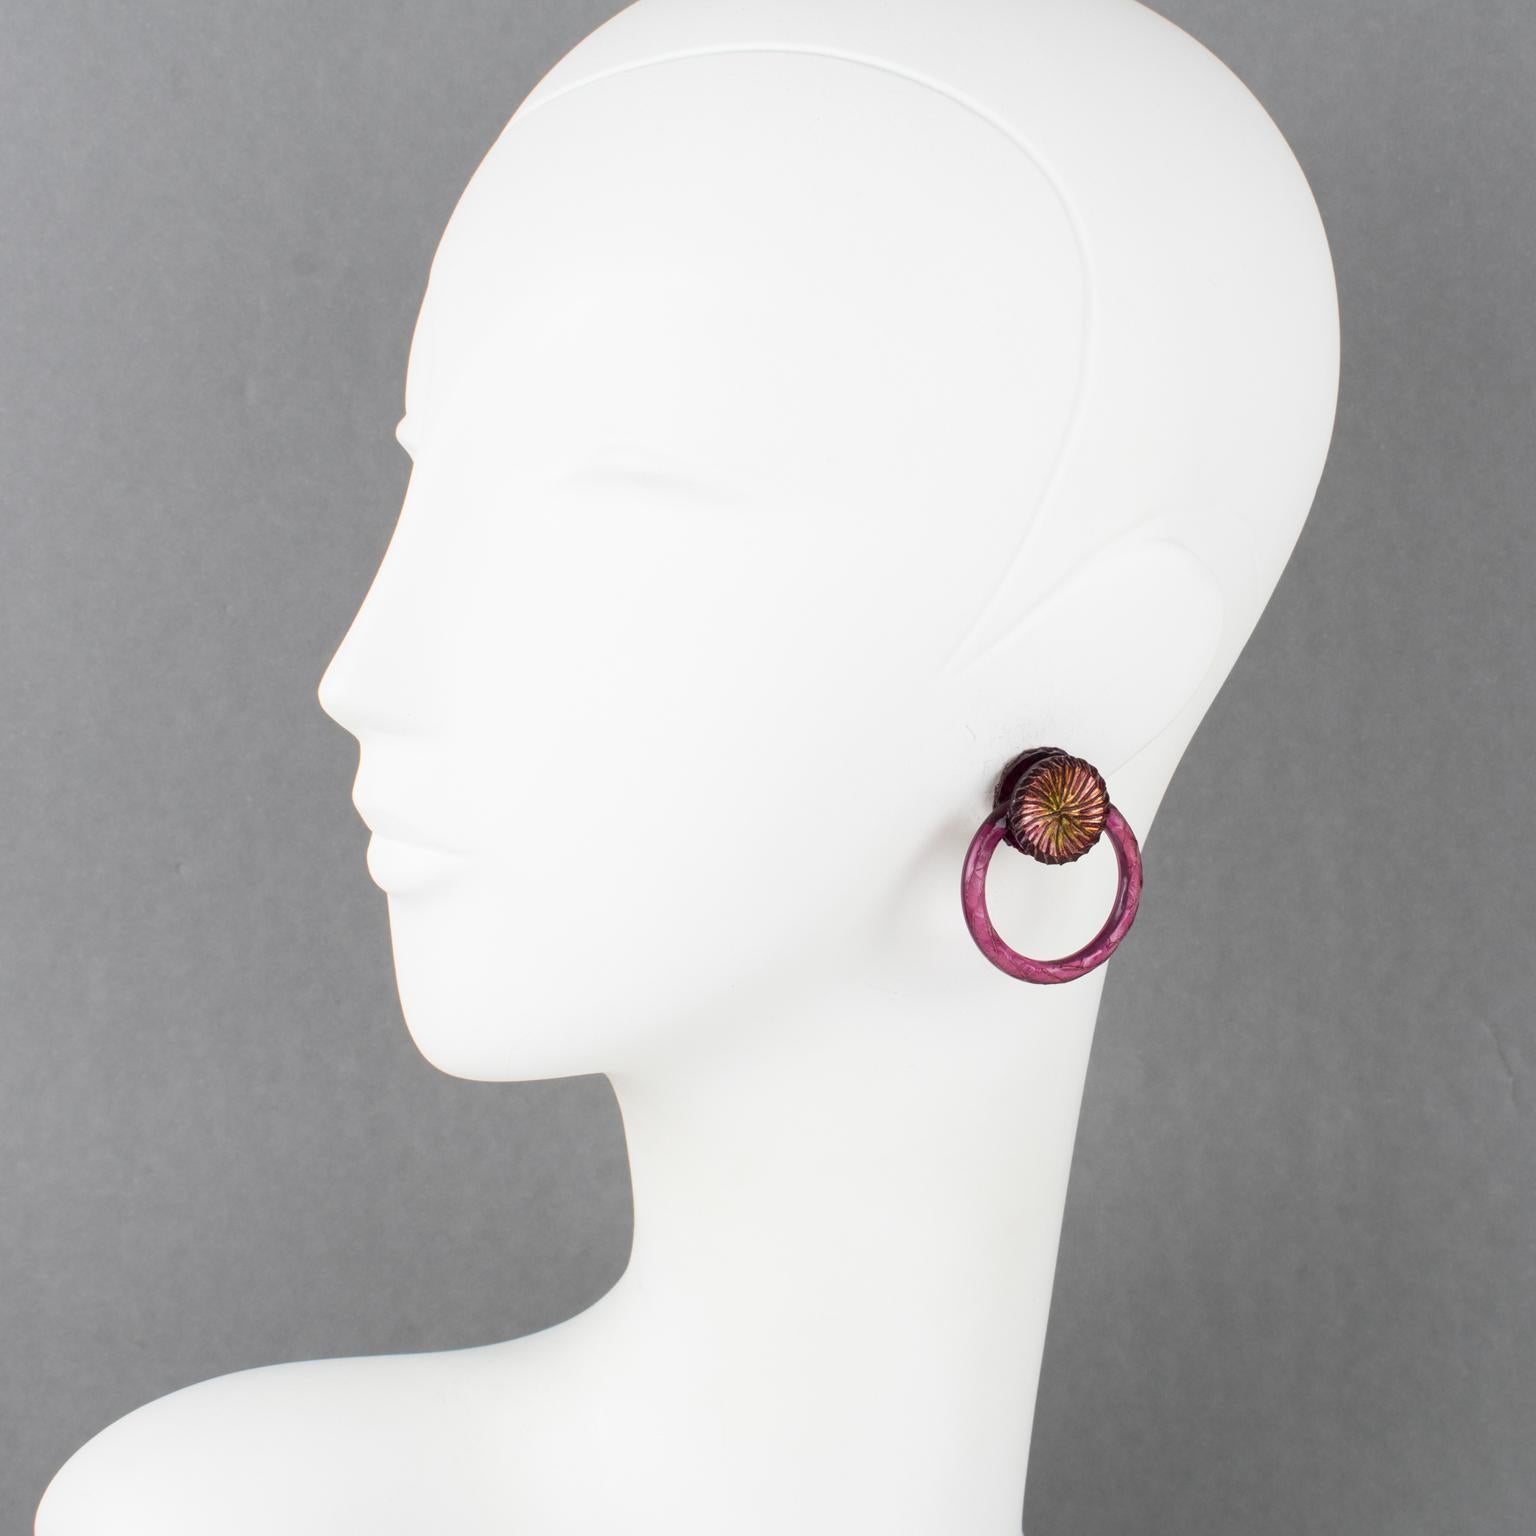 Stunning French Jewelry Designer Monique Vedie Paris clip-on earrings. Dimensional shape with carved door knocker design, in raspberry purple resin or Talosel, with iridescent overtone. Monique Vedie's vintage resin jewelry is always